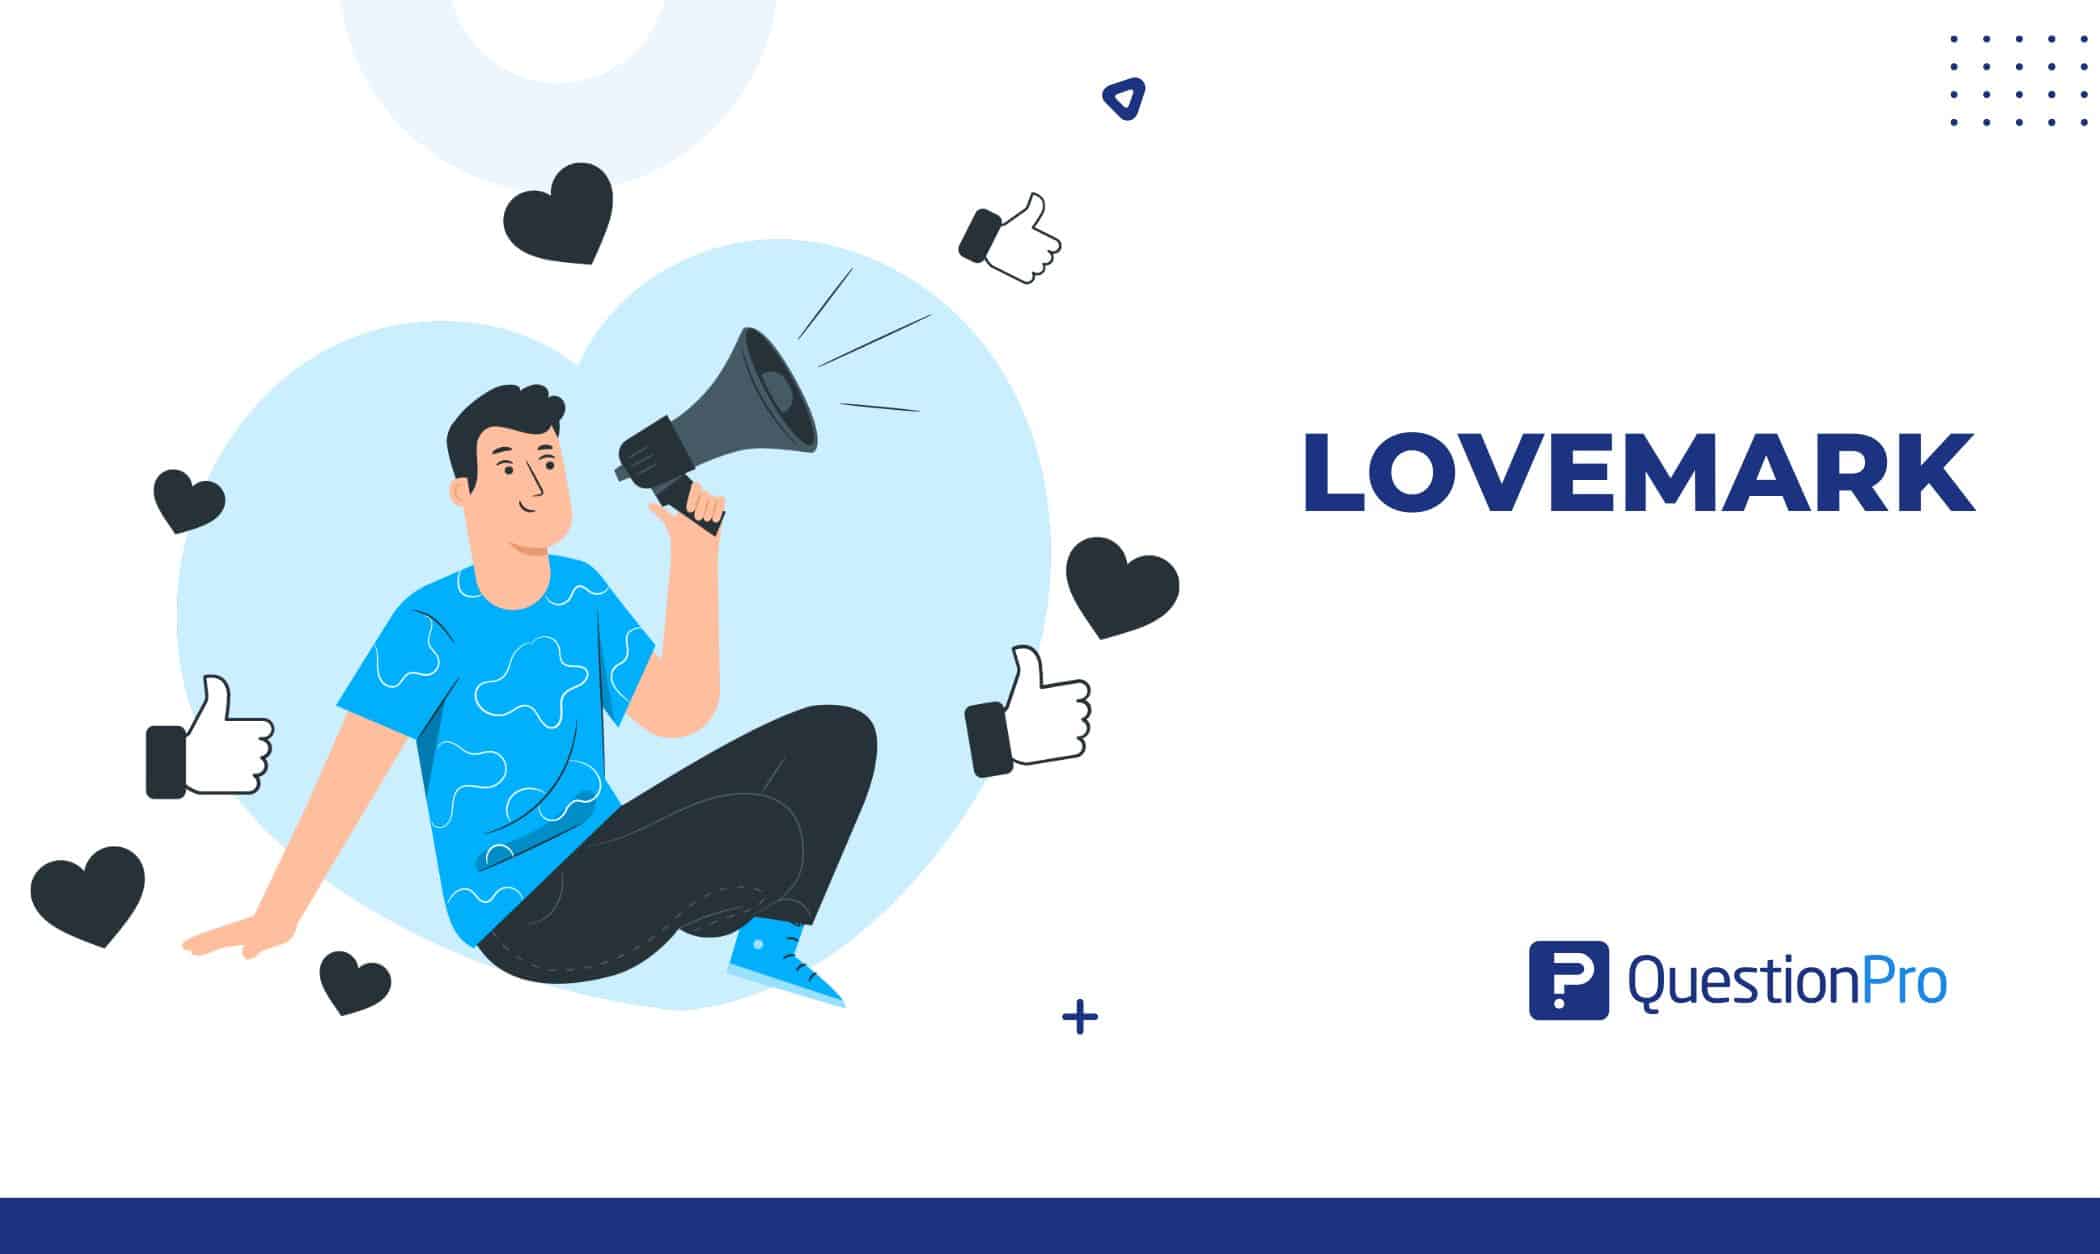 Lovemark is a marketing concept that aims to replace the concept of brands. It refers to brands whose customers are also supporters.